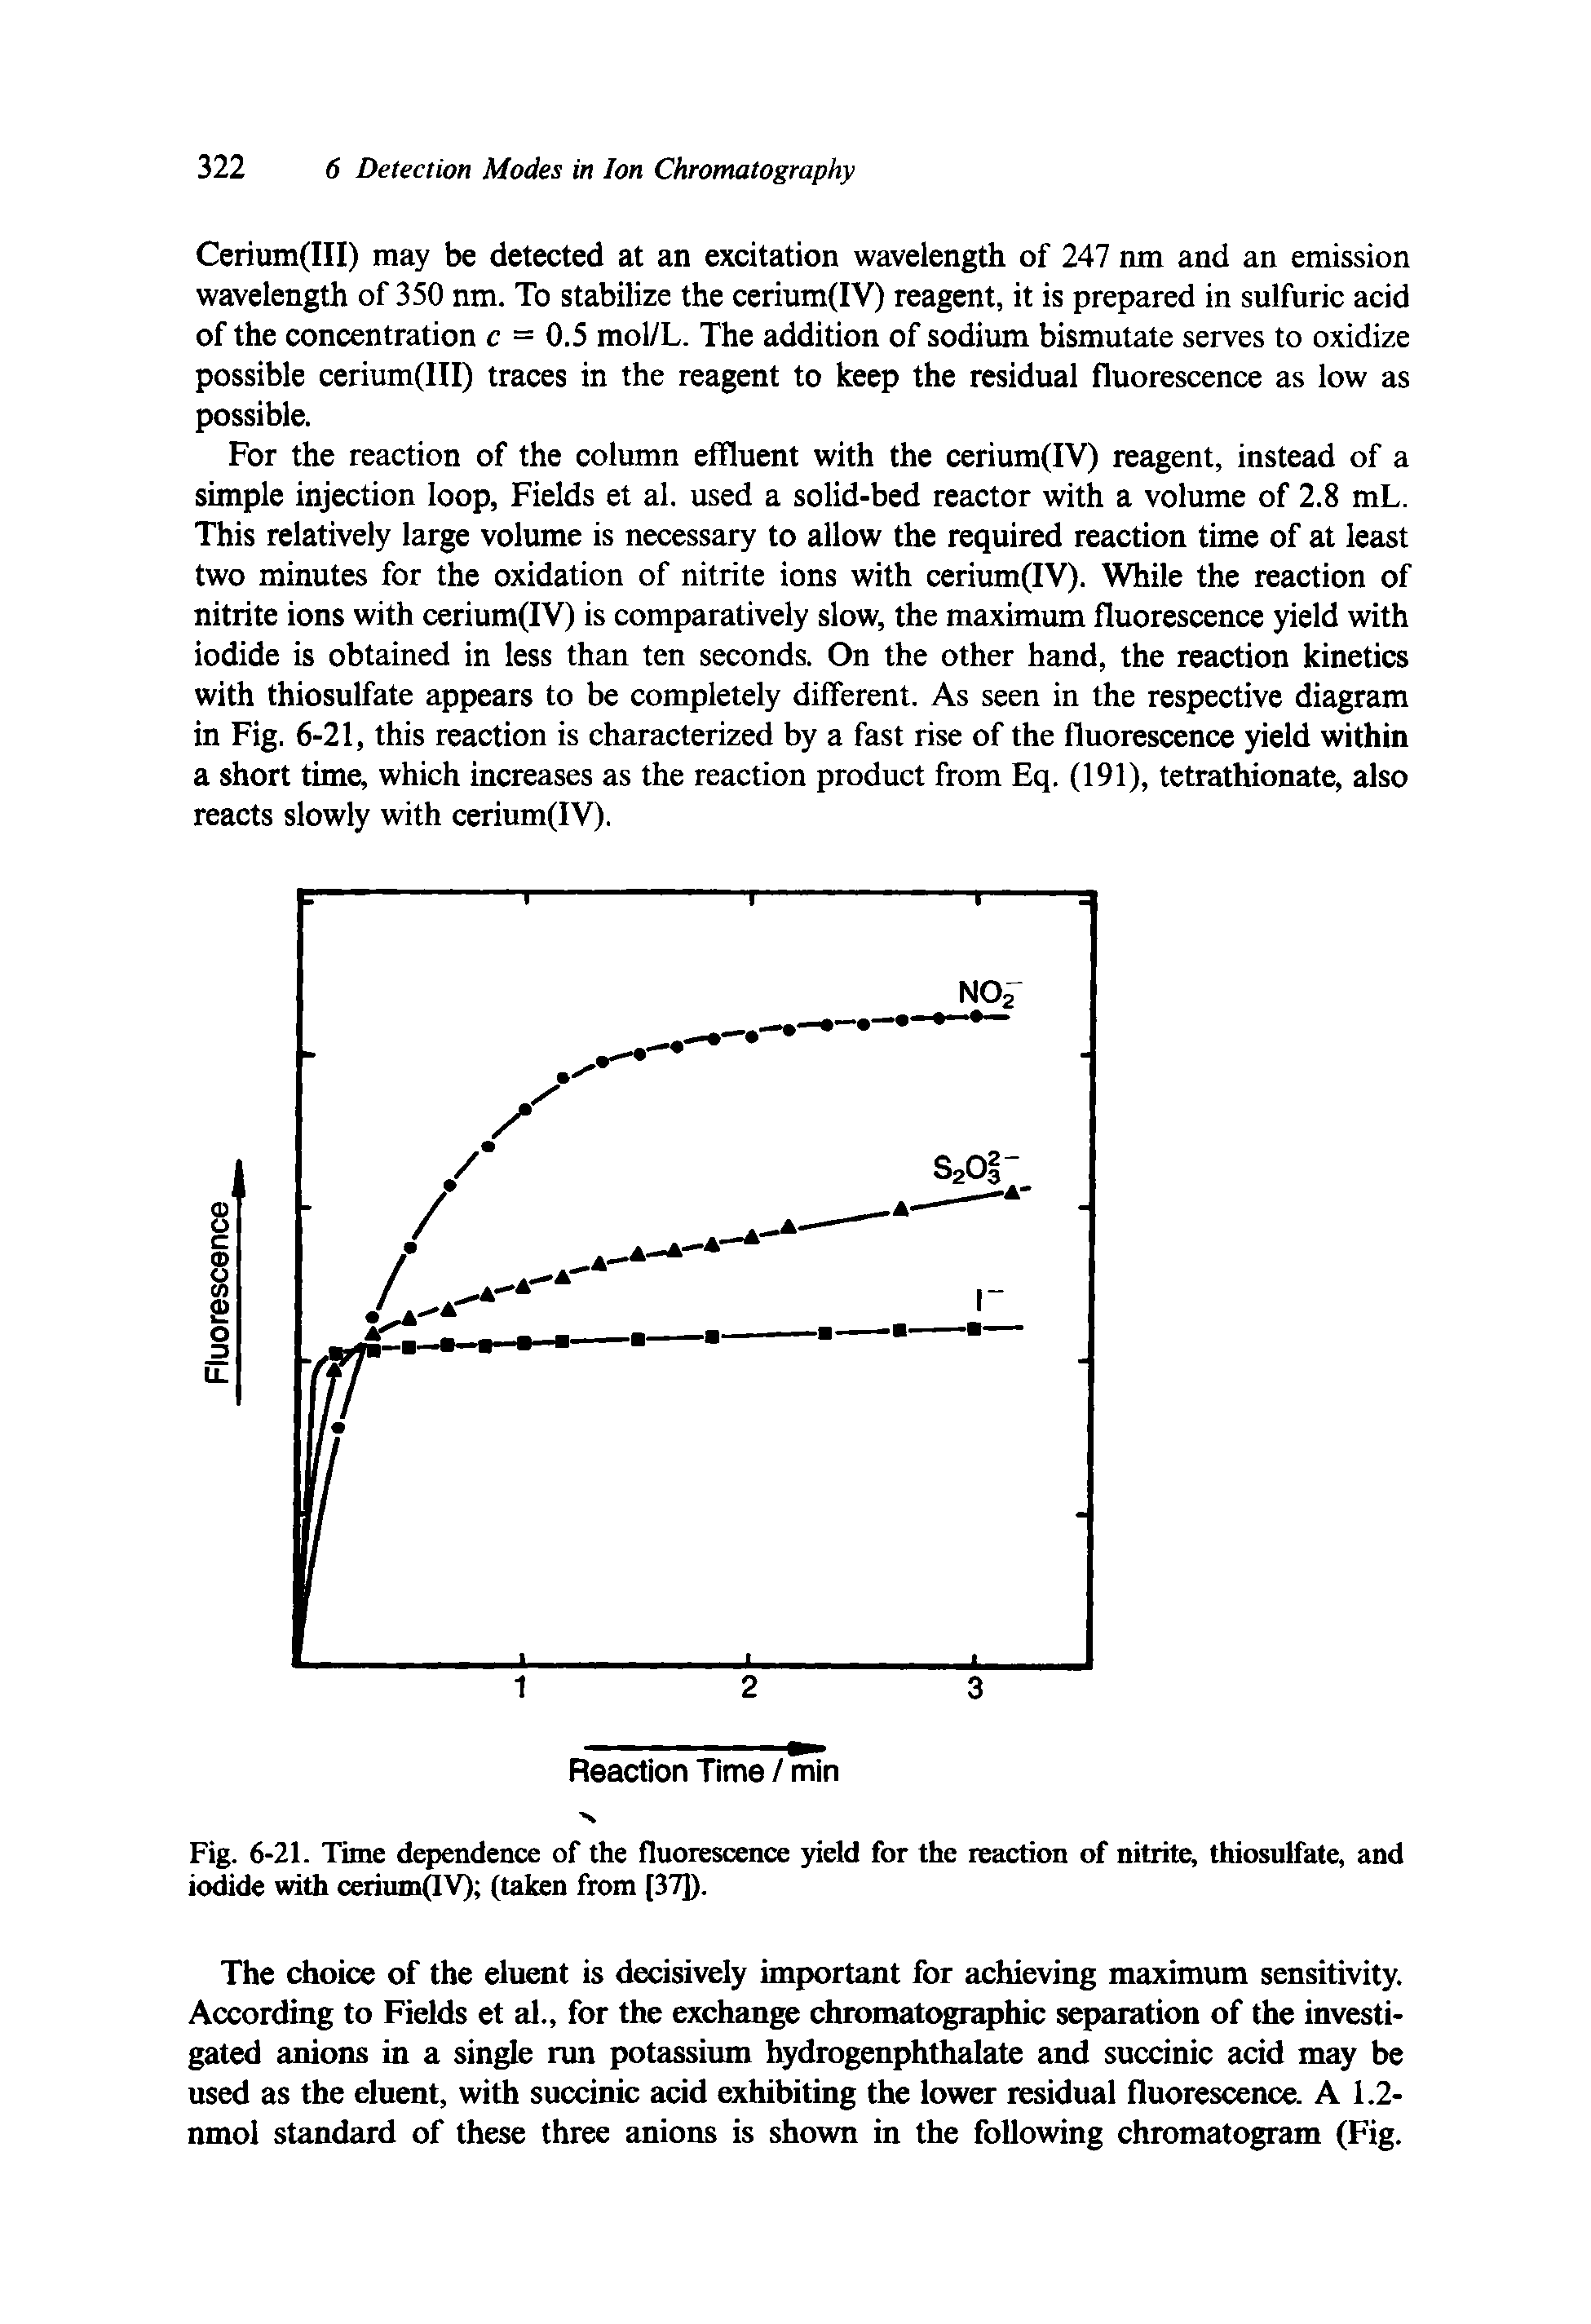 Fig. 6-21. Time dependence of the fluorescence yield for the reaction of nitrite, thiosulfate, and iodide with cerium(lV) (taken from [37]).